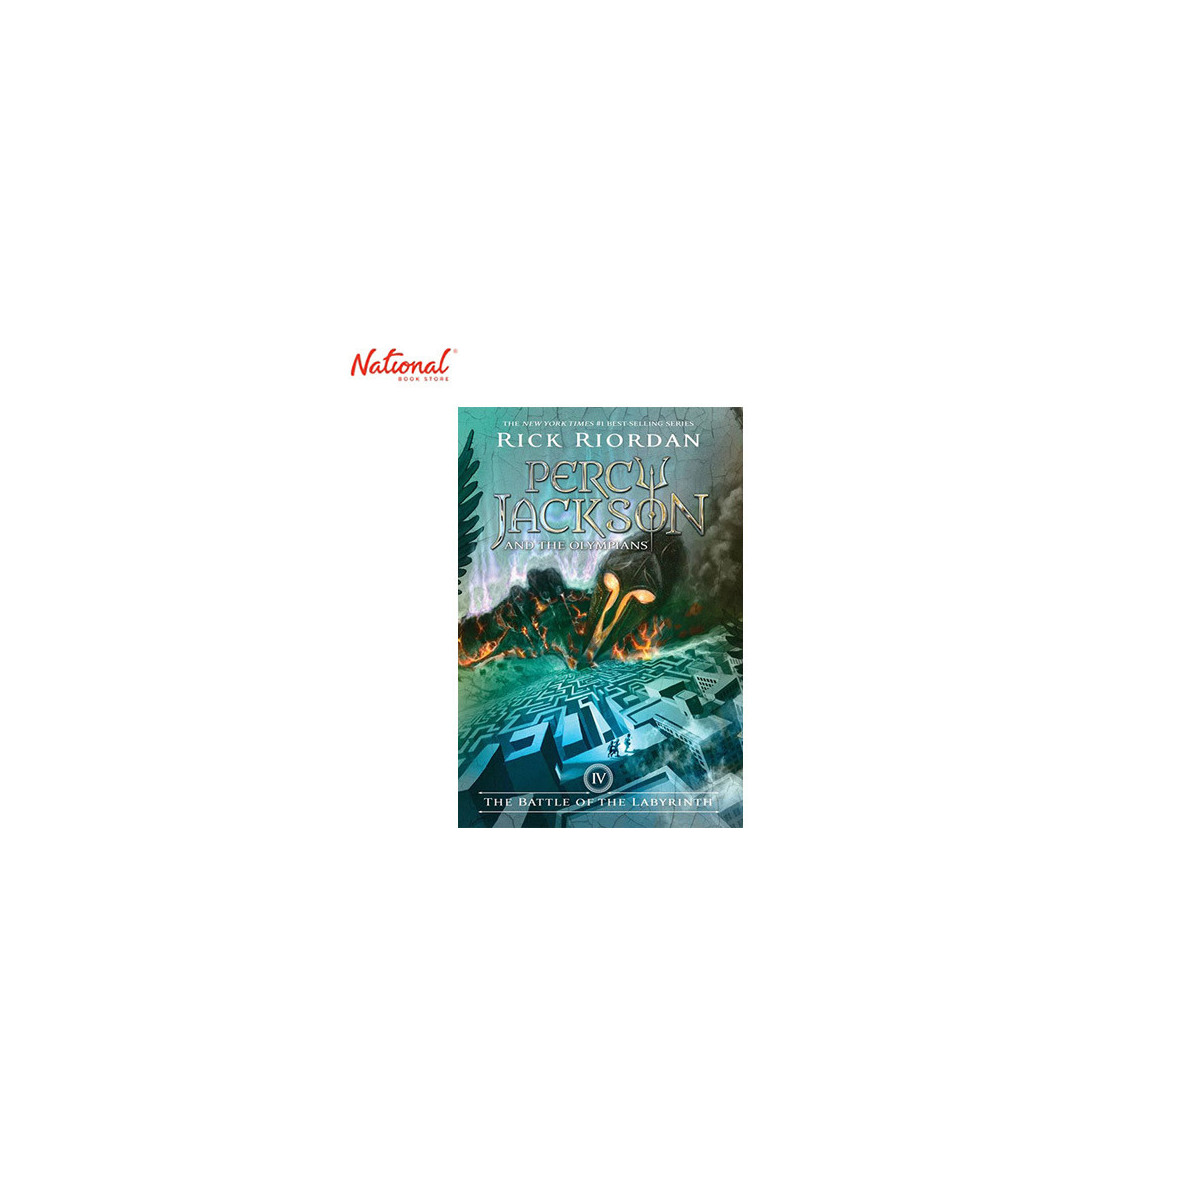 PERCY JACKSON AND THE OLYMPIANS4 THE BATTLE OF THE LABYRINTH